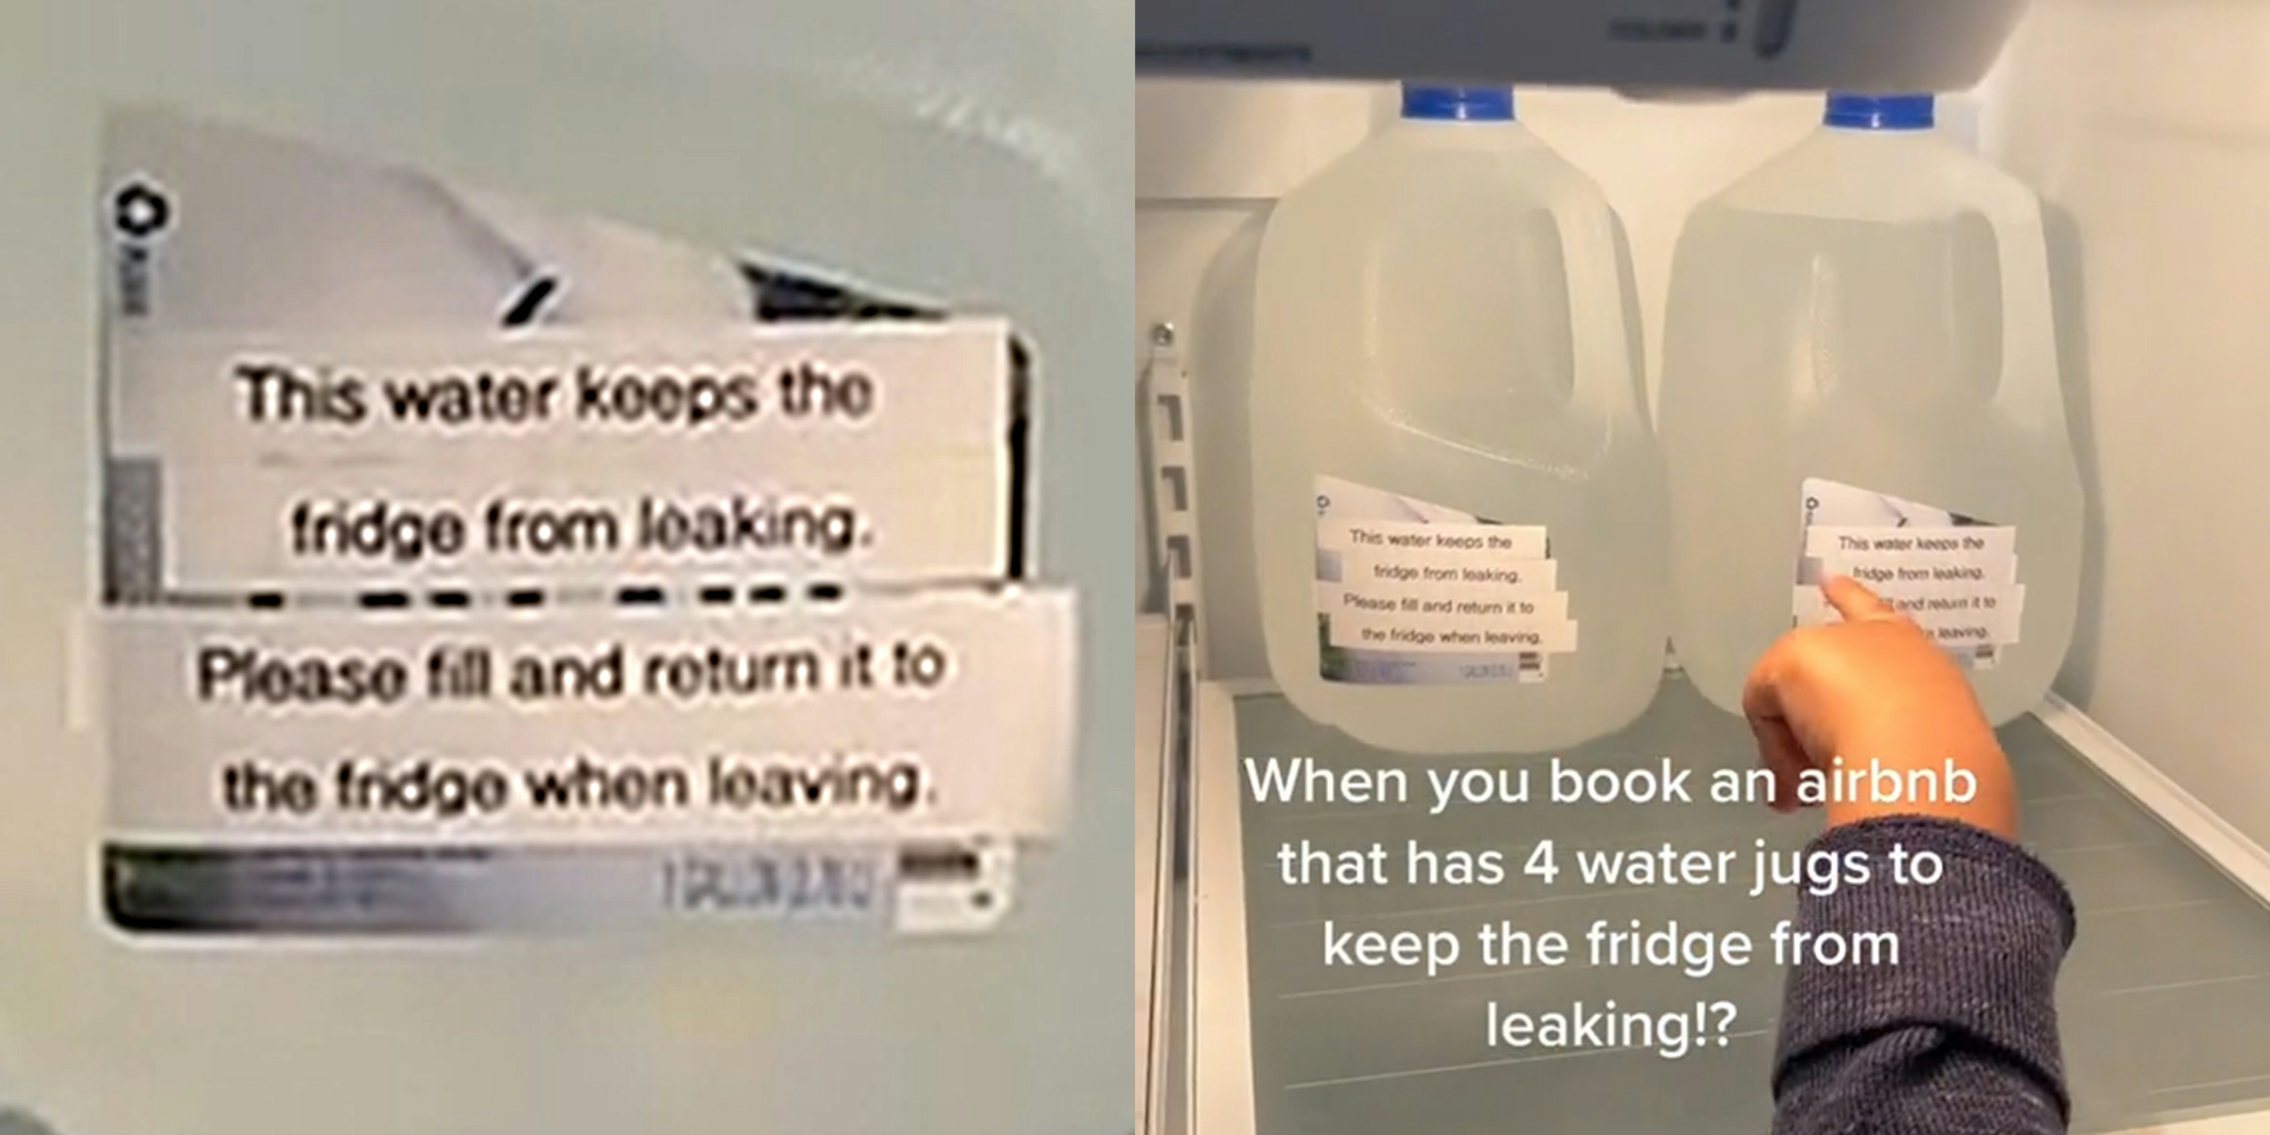 sign that reads 'This water keeps the fridge from leaking. Please fill and return it to the fridge when leaving.' (l) hand pointing to water jugs in refrigerator with sign from left panel (r)